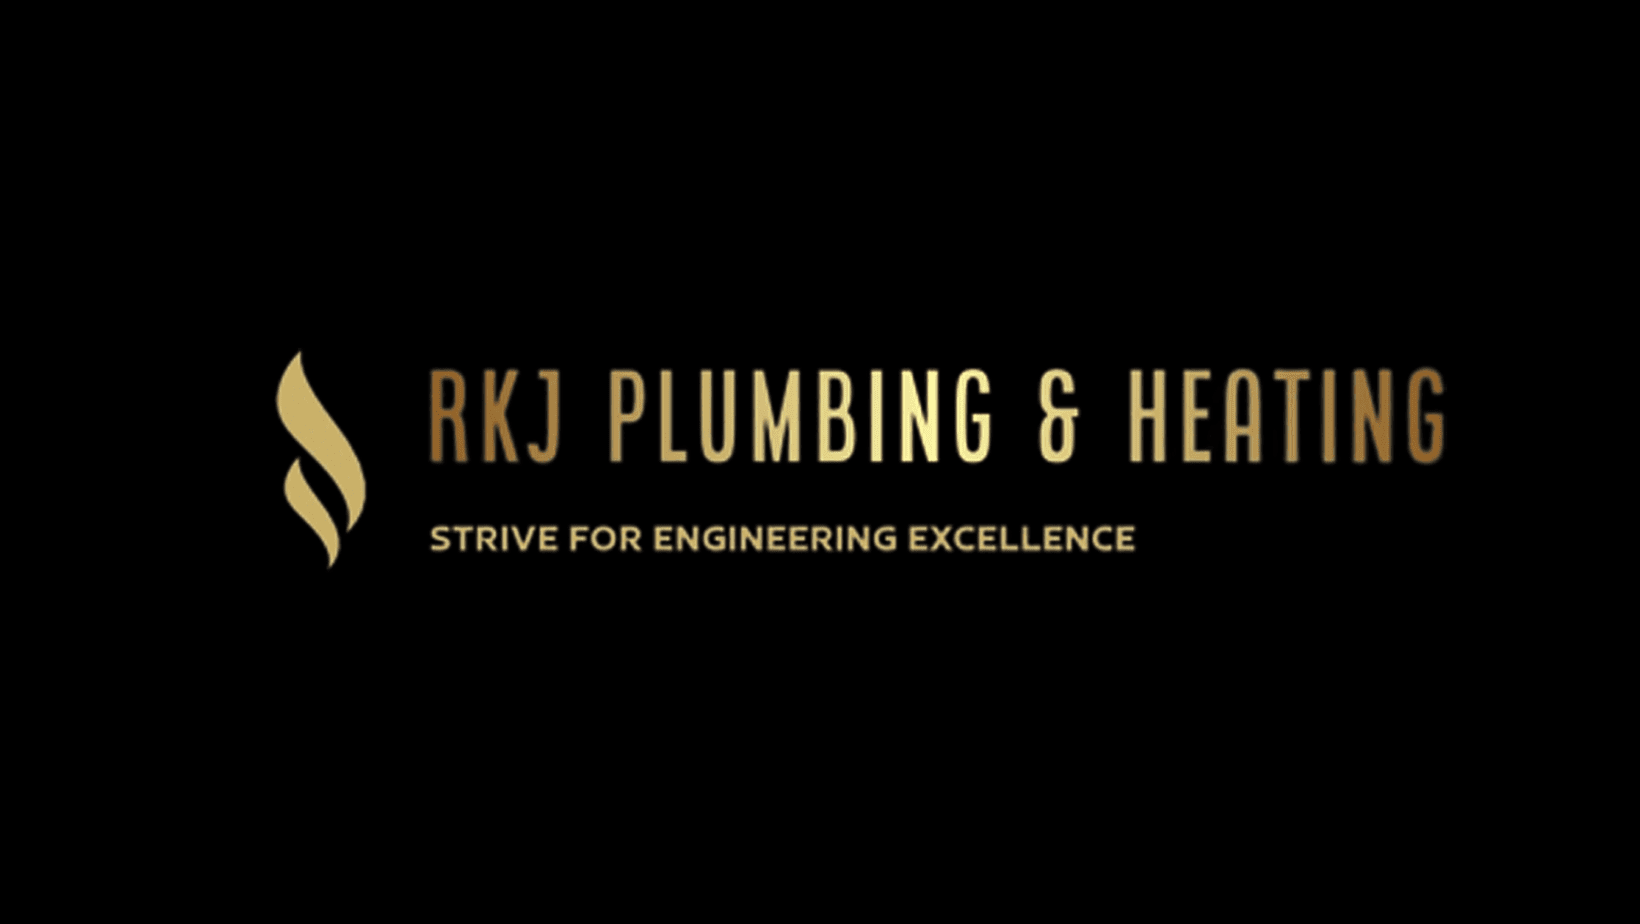 RKJ Plumbing and Heating - Step into Warmth and Efficiency